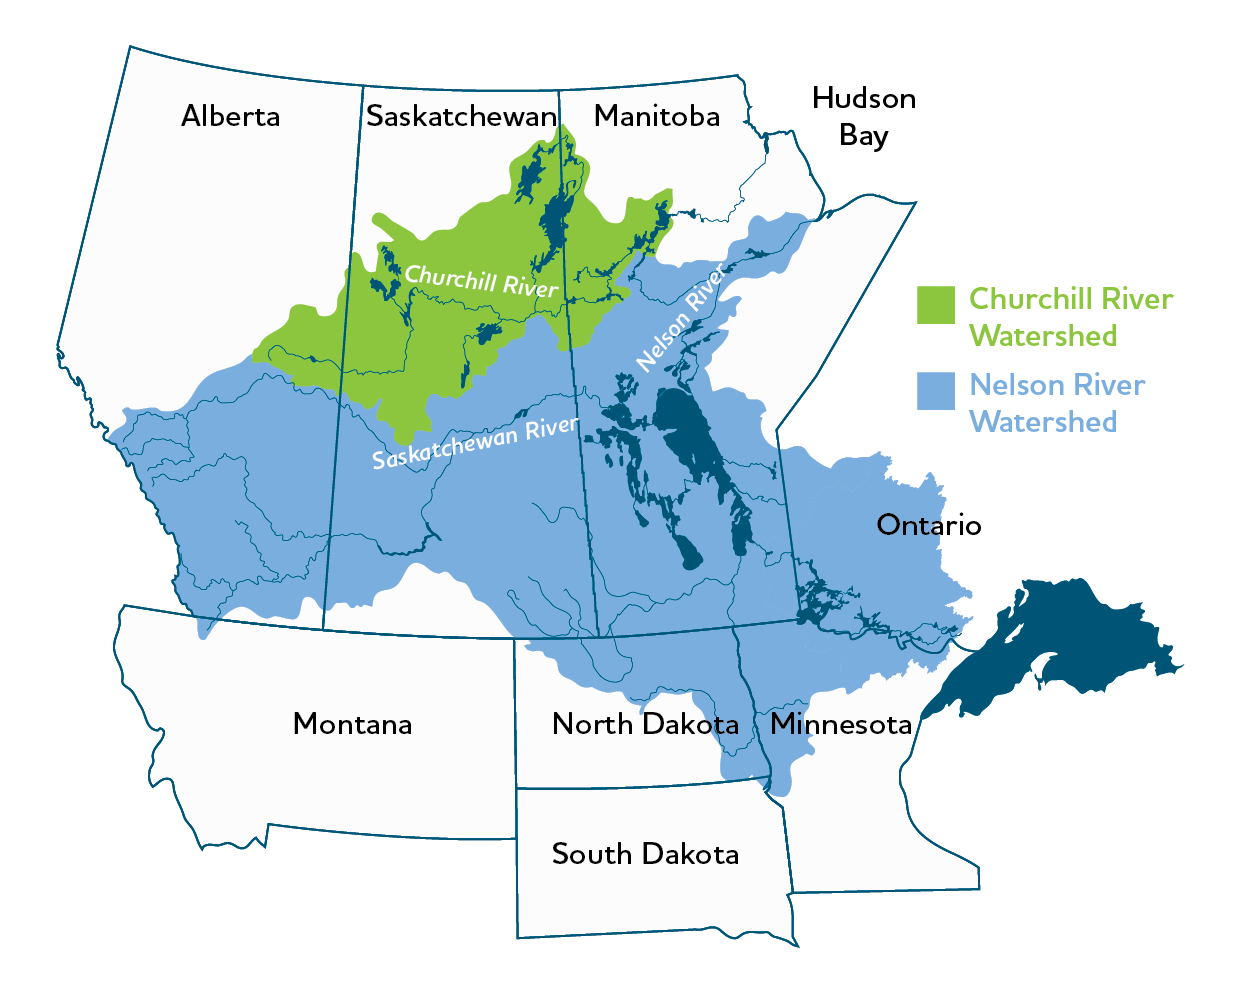 The Manitoba Hydro system watershed.